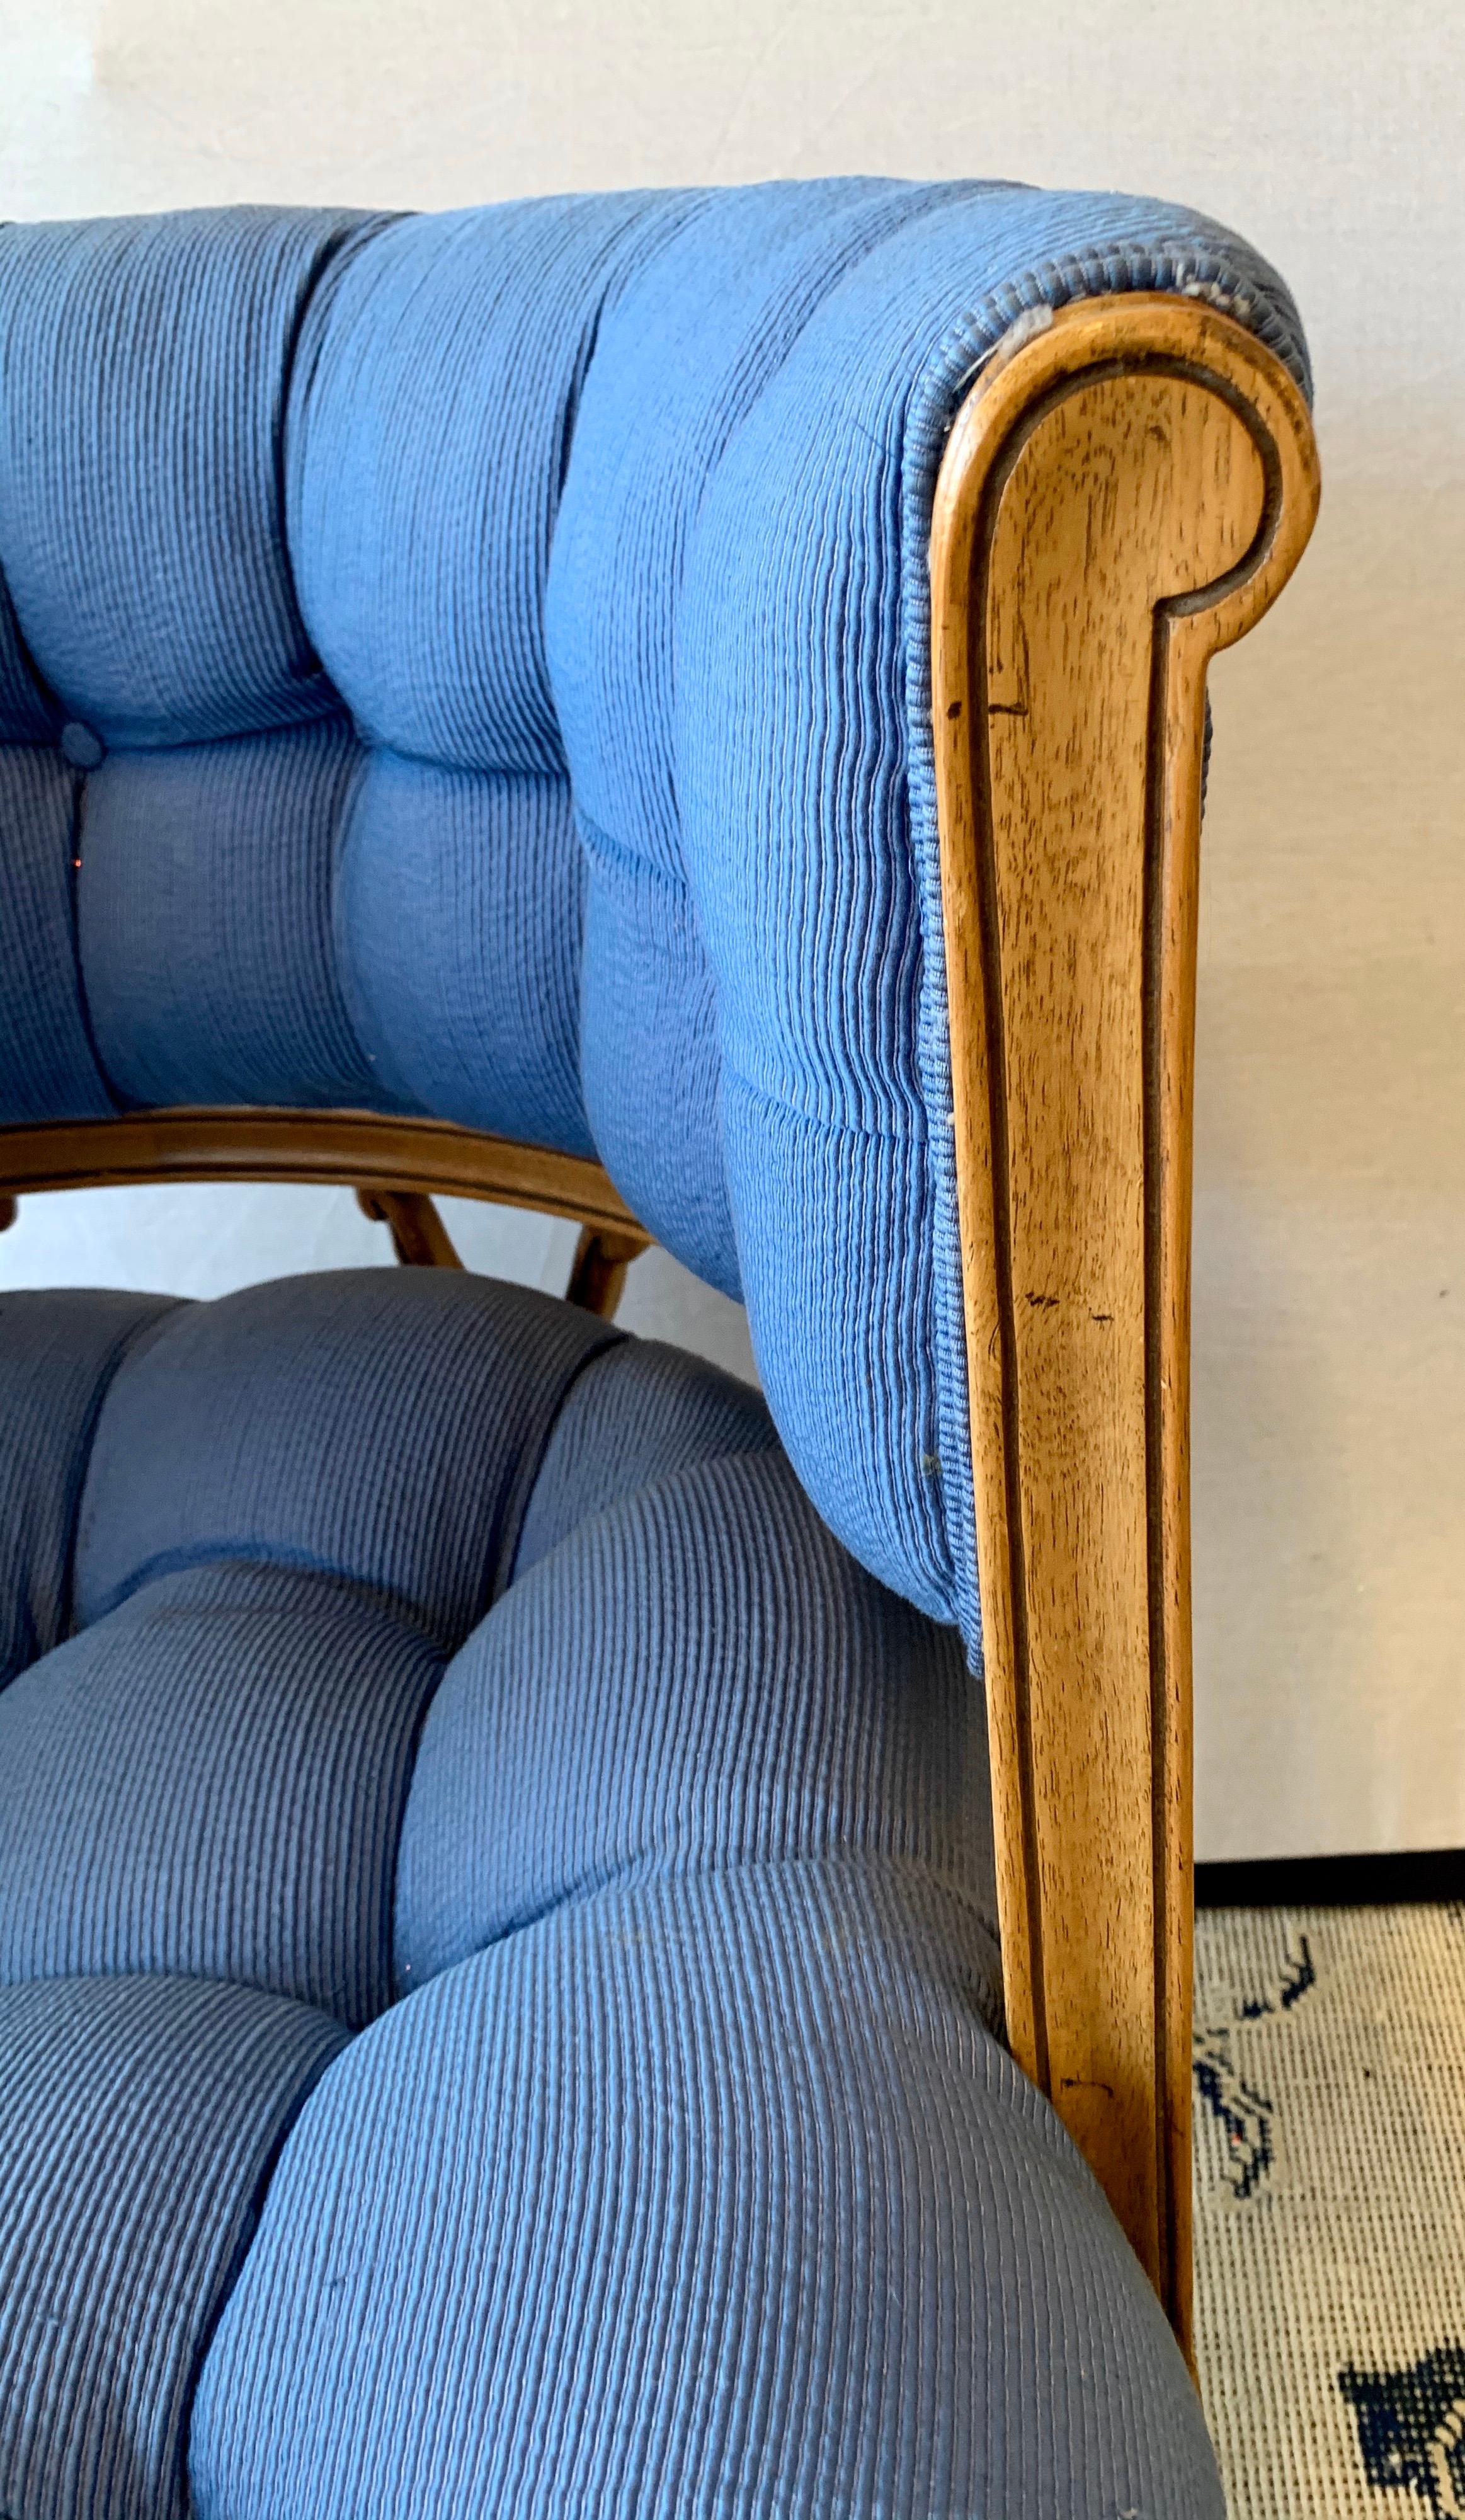 Carved tufted barrel back armchair with open trellis like details in back. Newer cotton upholstery is in the coveted 2020 blue pantone shade. The fabric has a subtle ribbed pattern.